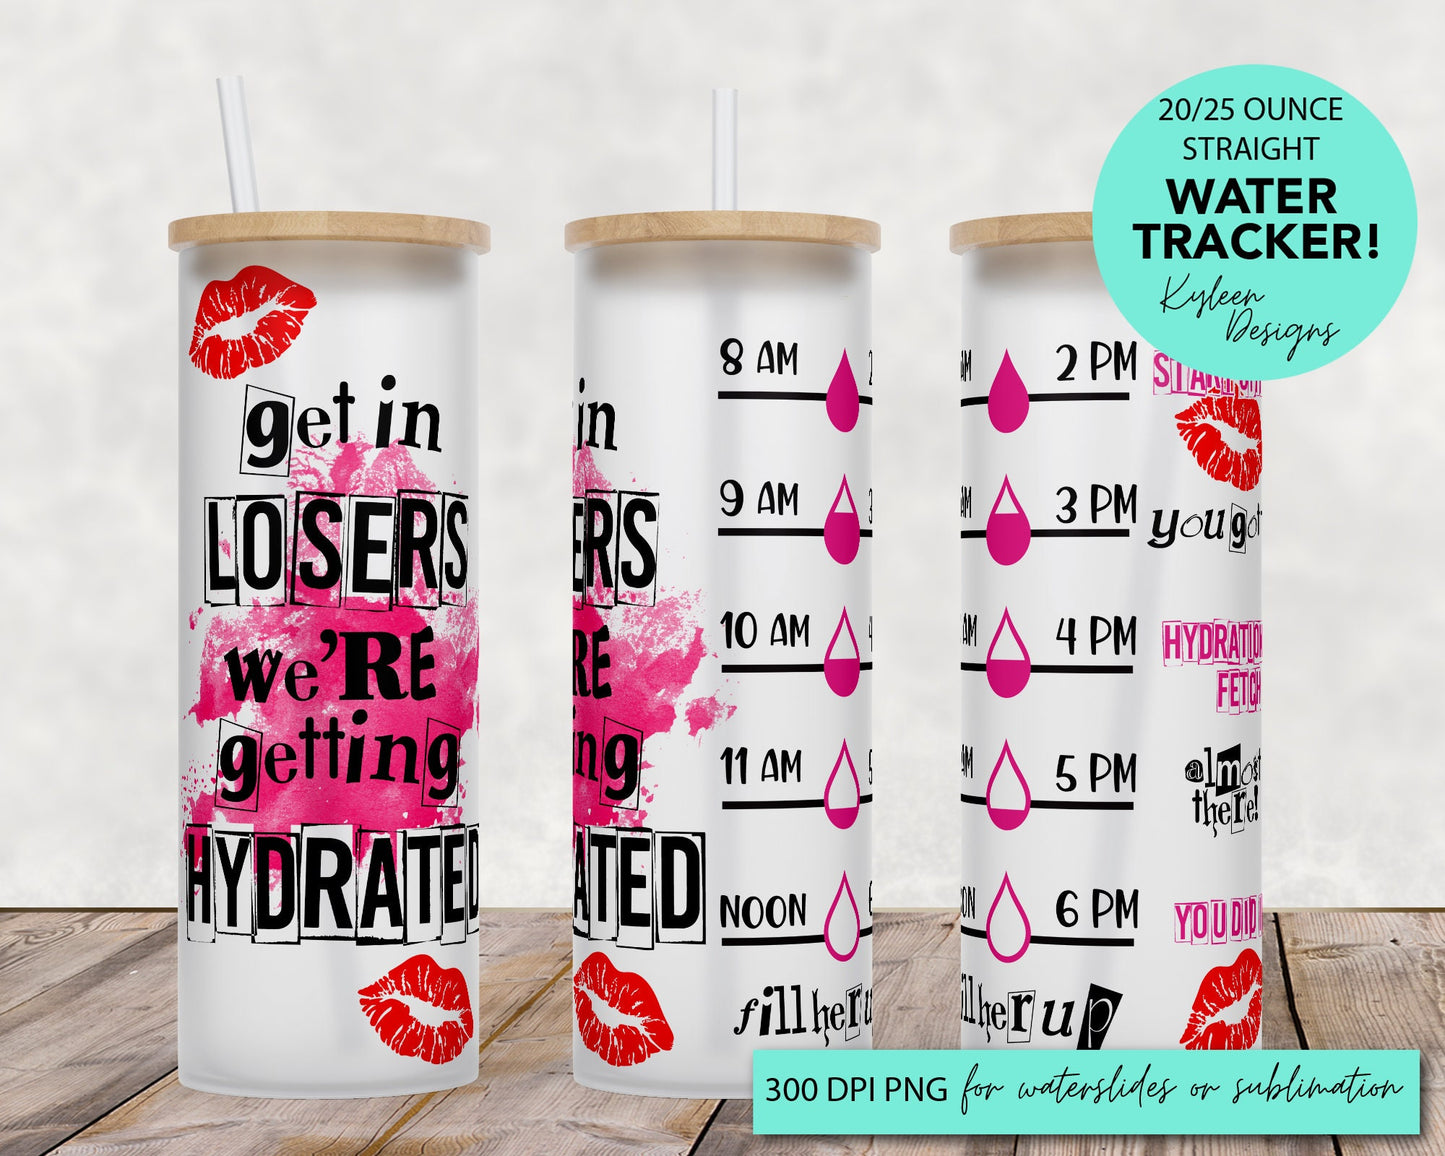 25 oz glass tumbler get in losers Water tracker 20/25 ounce wrap for sublimation, waterslide High res PNG digital file